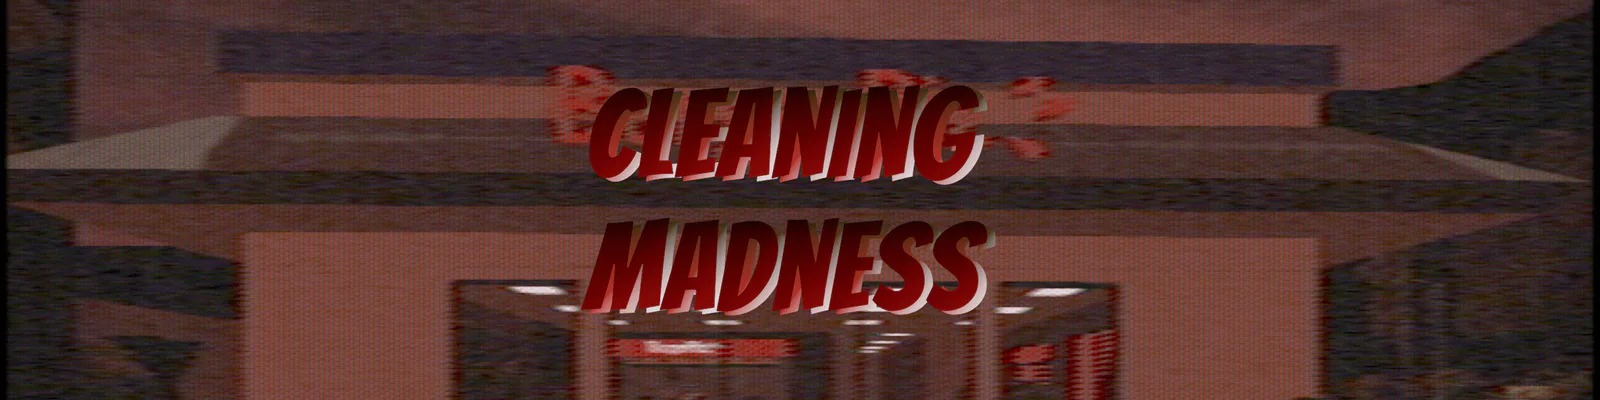 Cleaning Madness